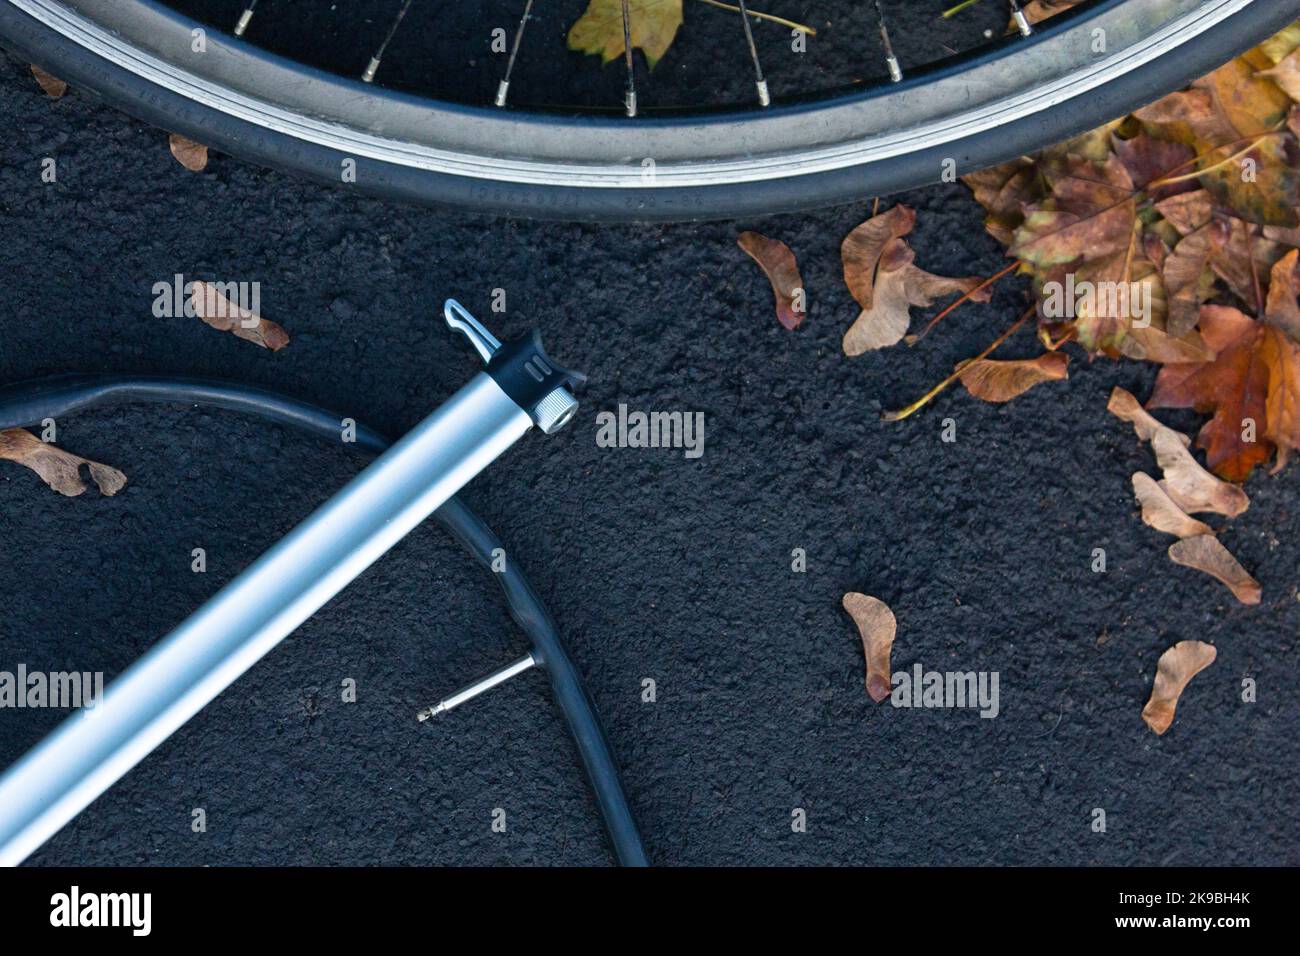 A bicycle wheel, pump and inner tube during autumn Stock Photo